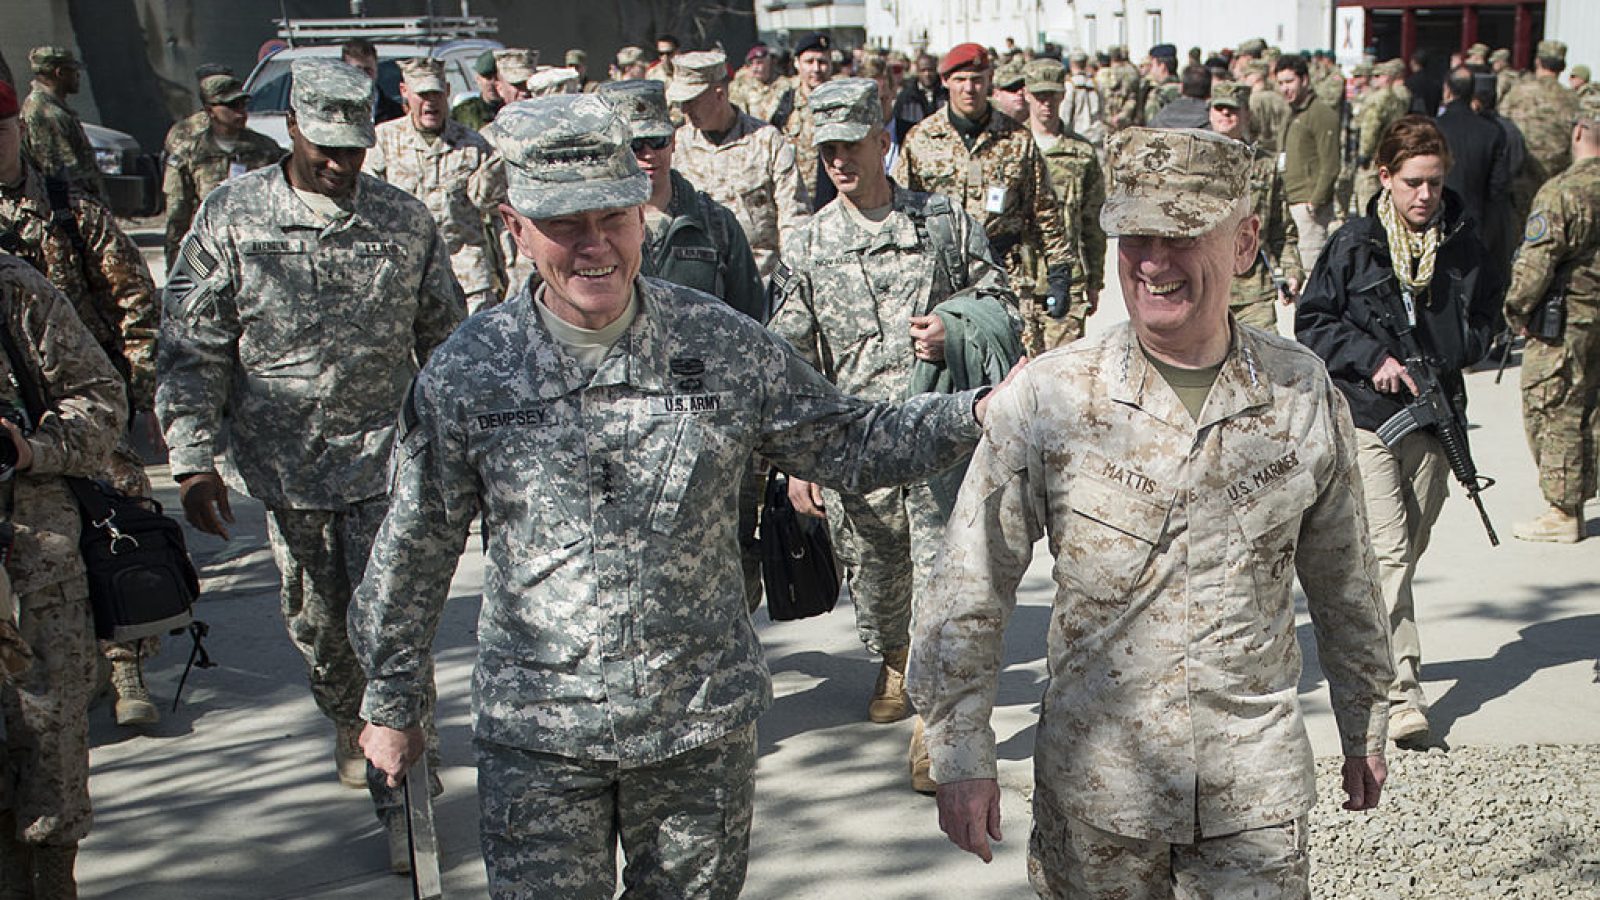 Chairman of the Joint Chiefs of Staff Gen. Martin E. Dempsey and Commander, U.S. Central Command Gen. James Mattis leaving the International Security Assistance Force change-of-command ceremony